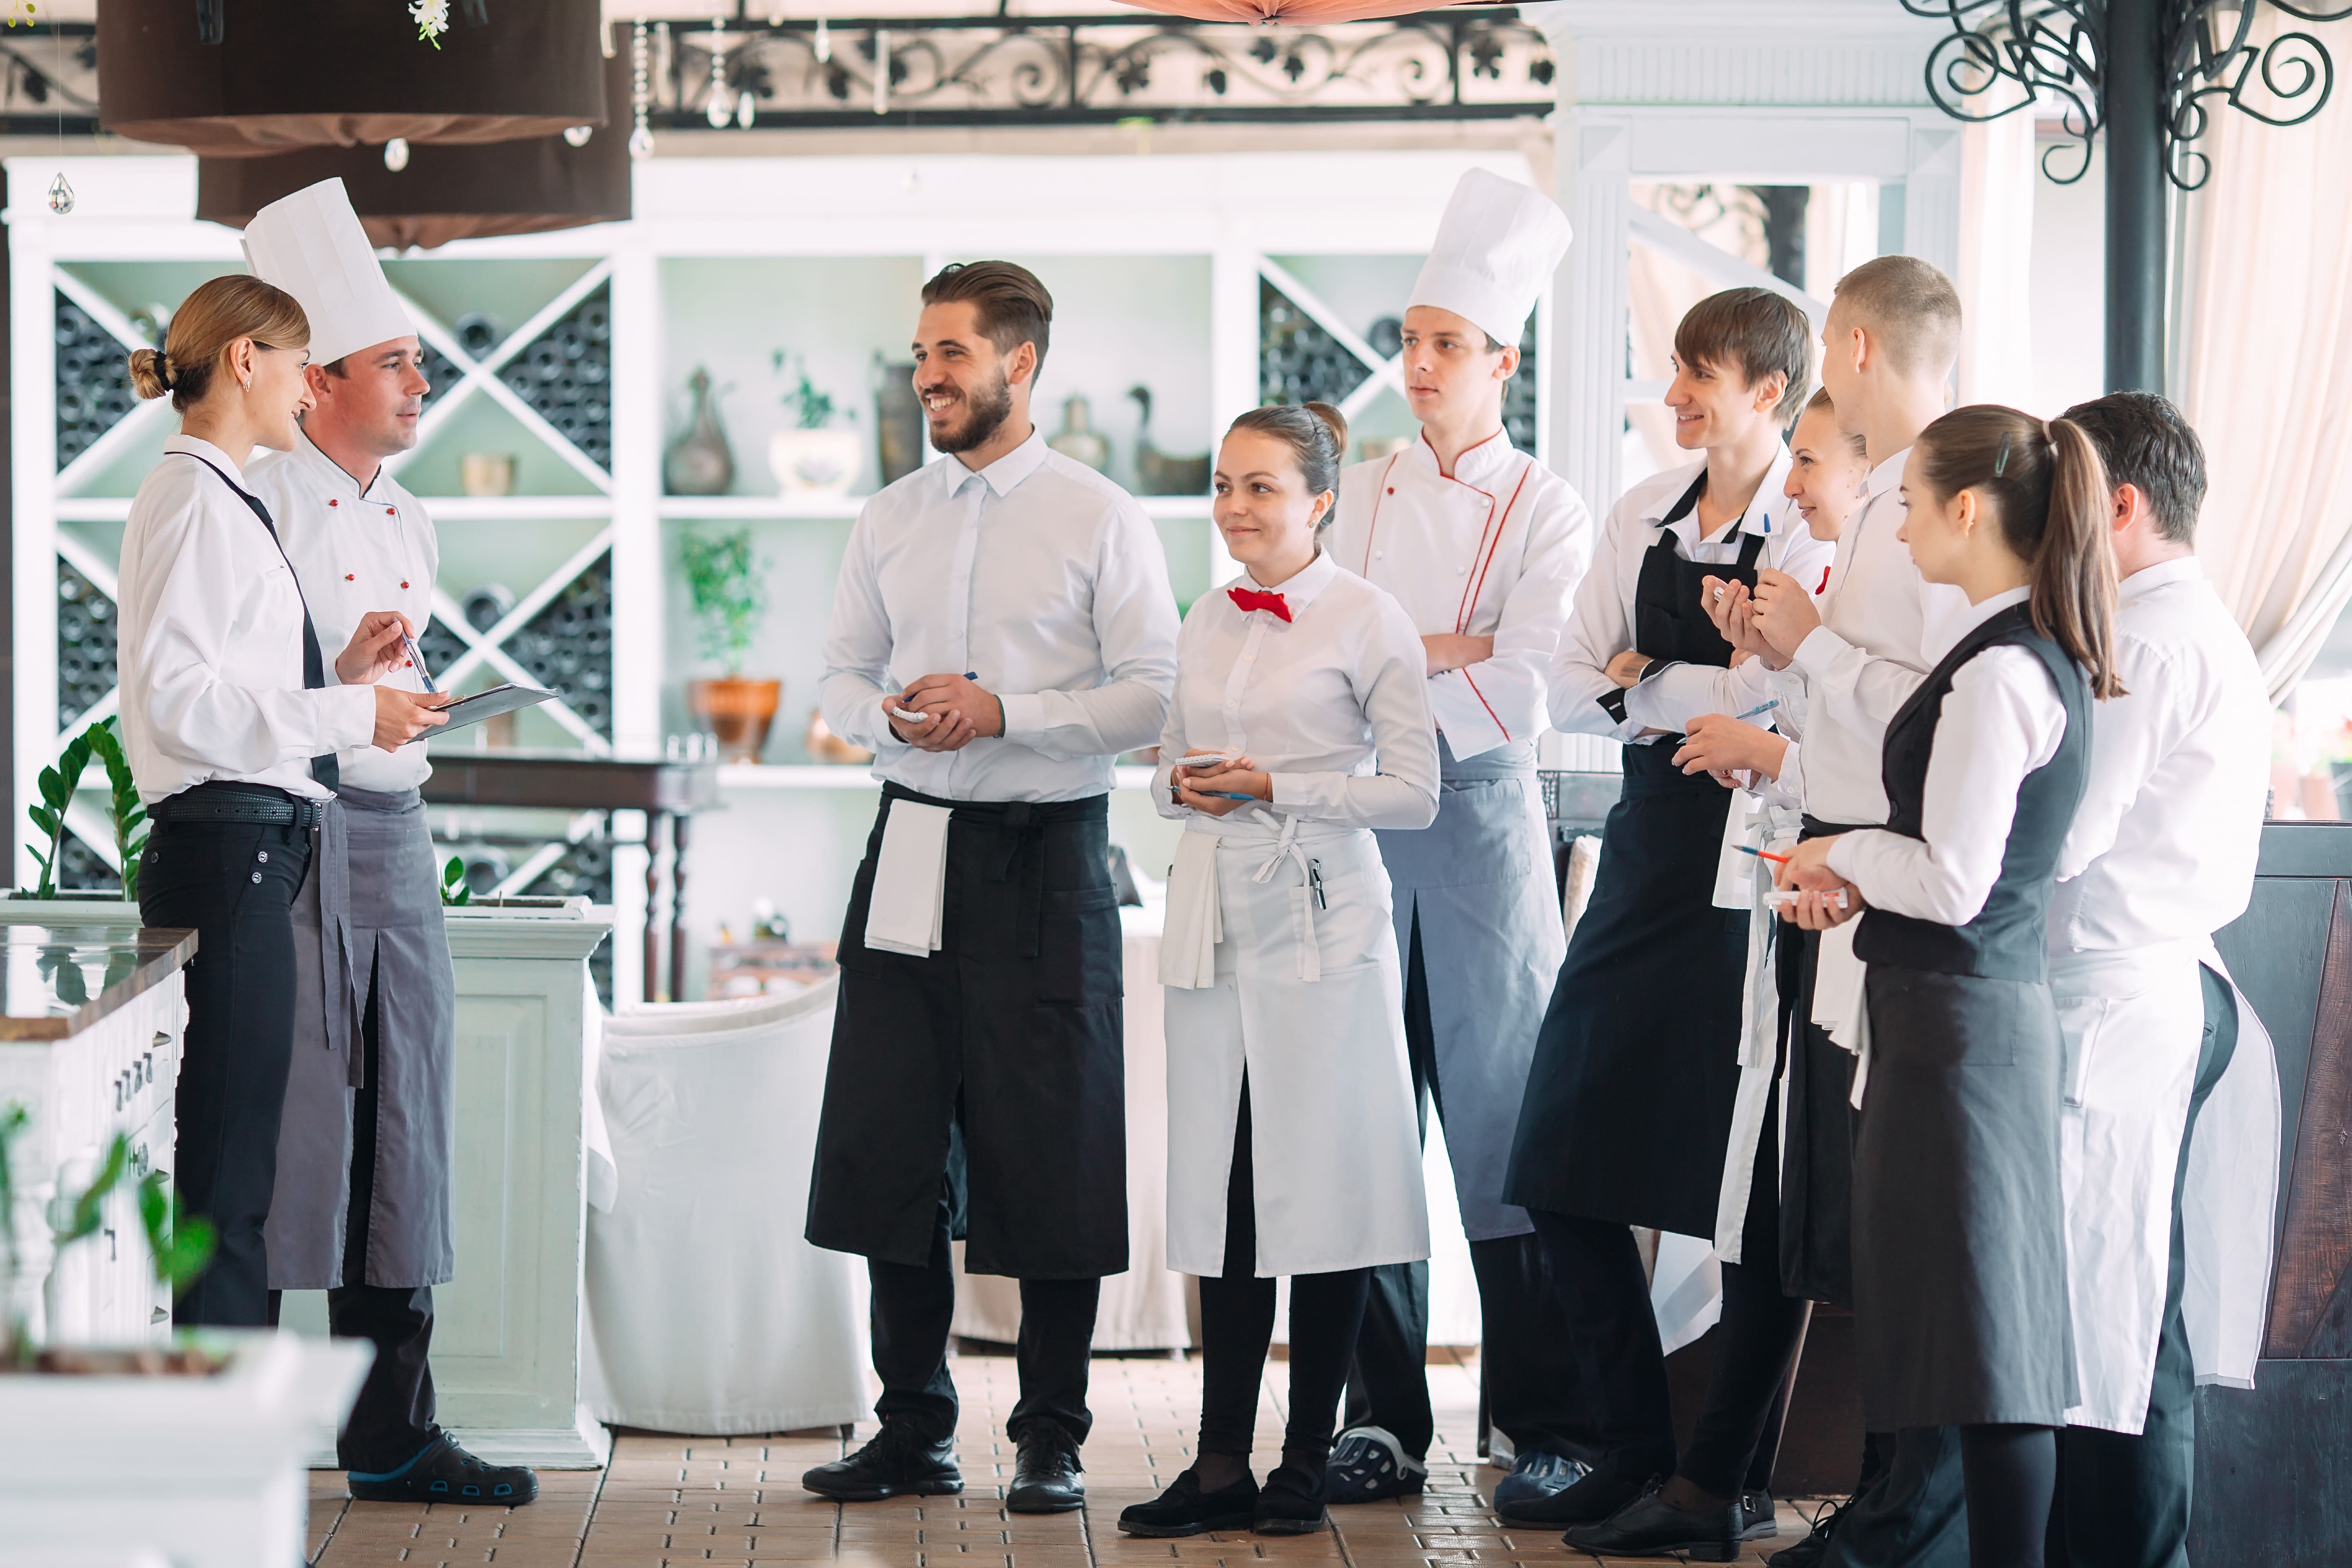 With over 50% of women workforce gender equality is still a myth in the hospitality sector